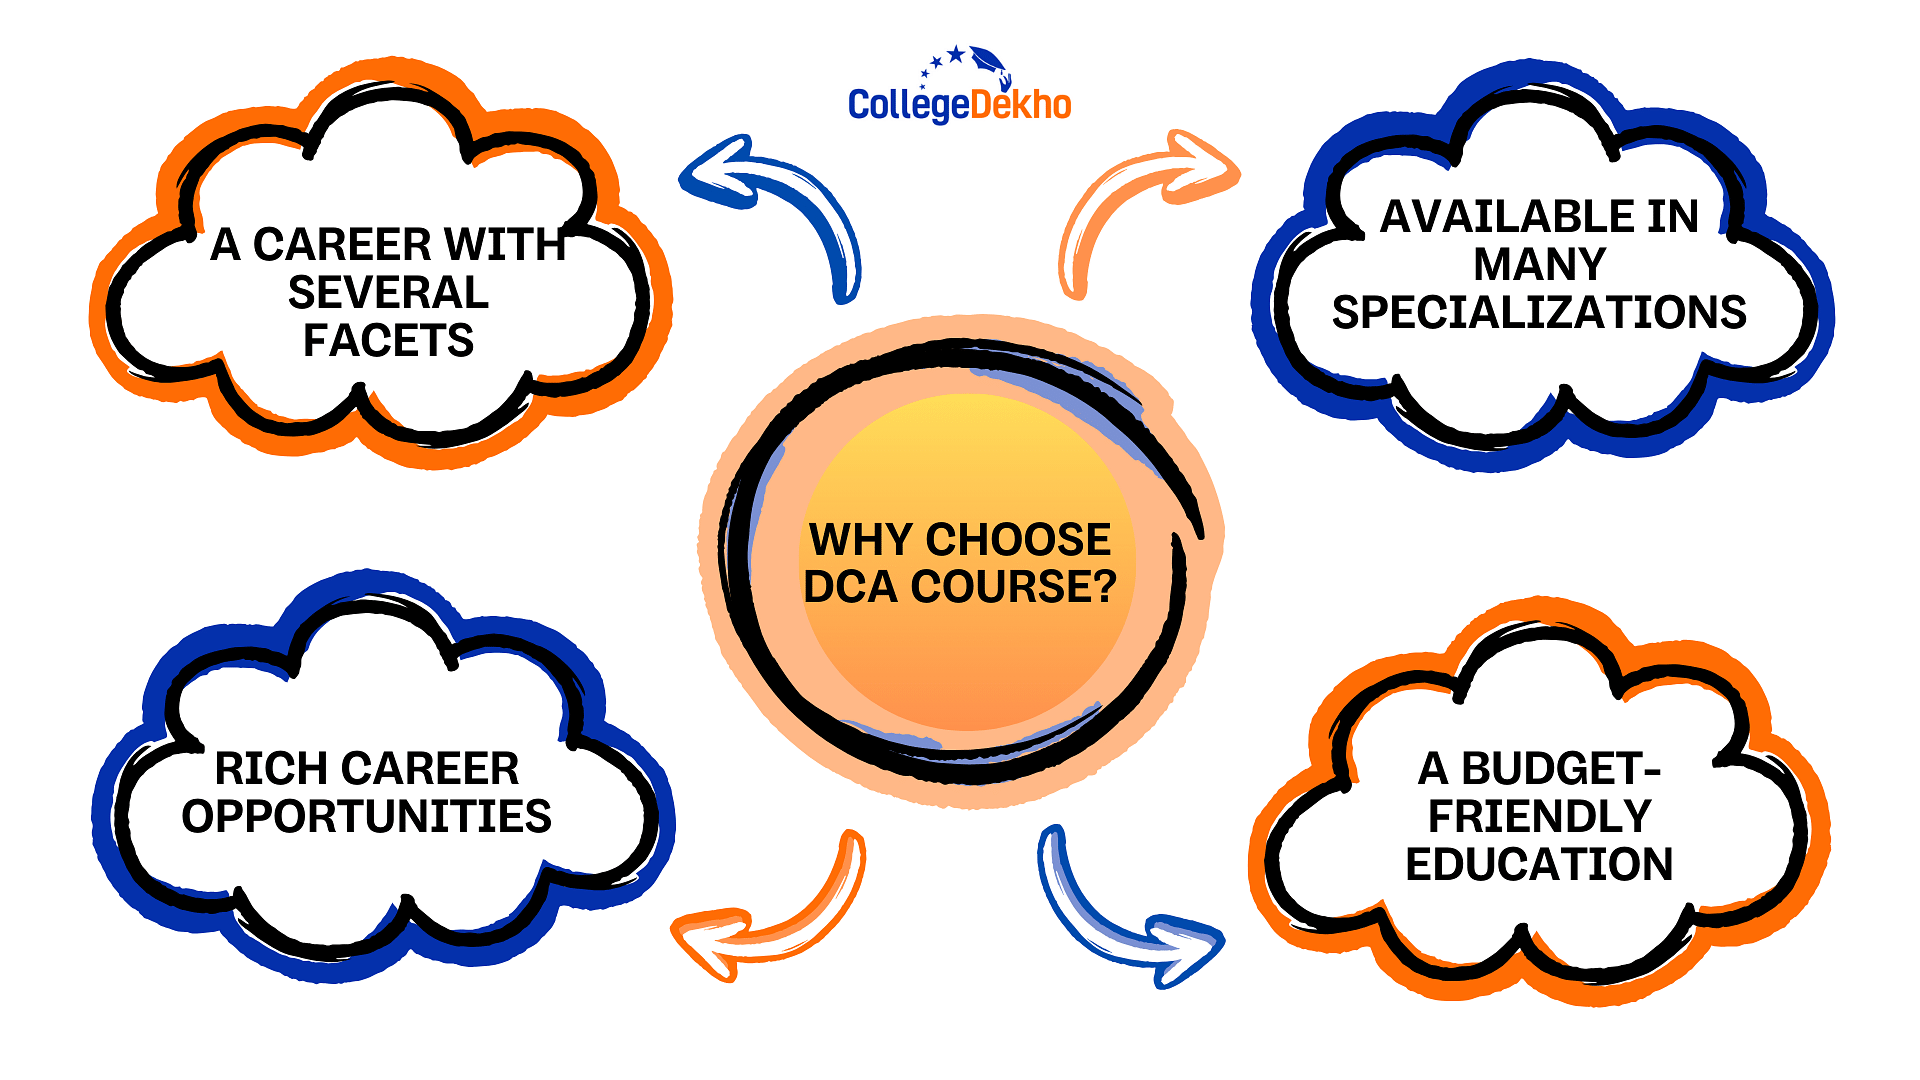 Why Choose DCA Course?